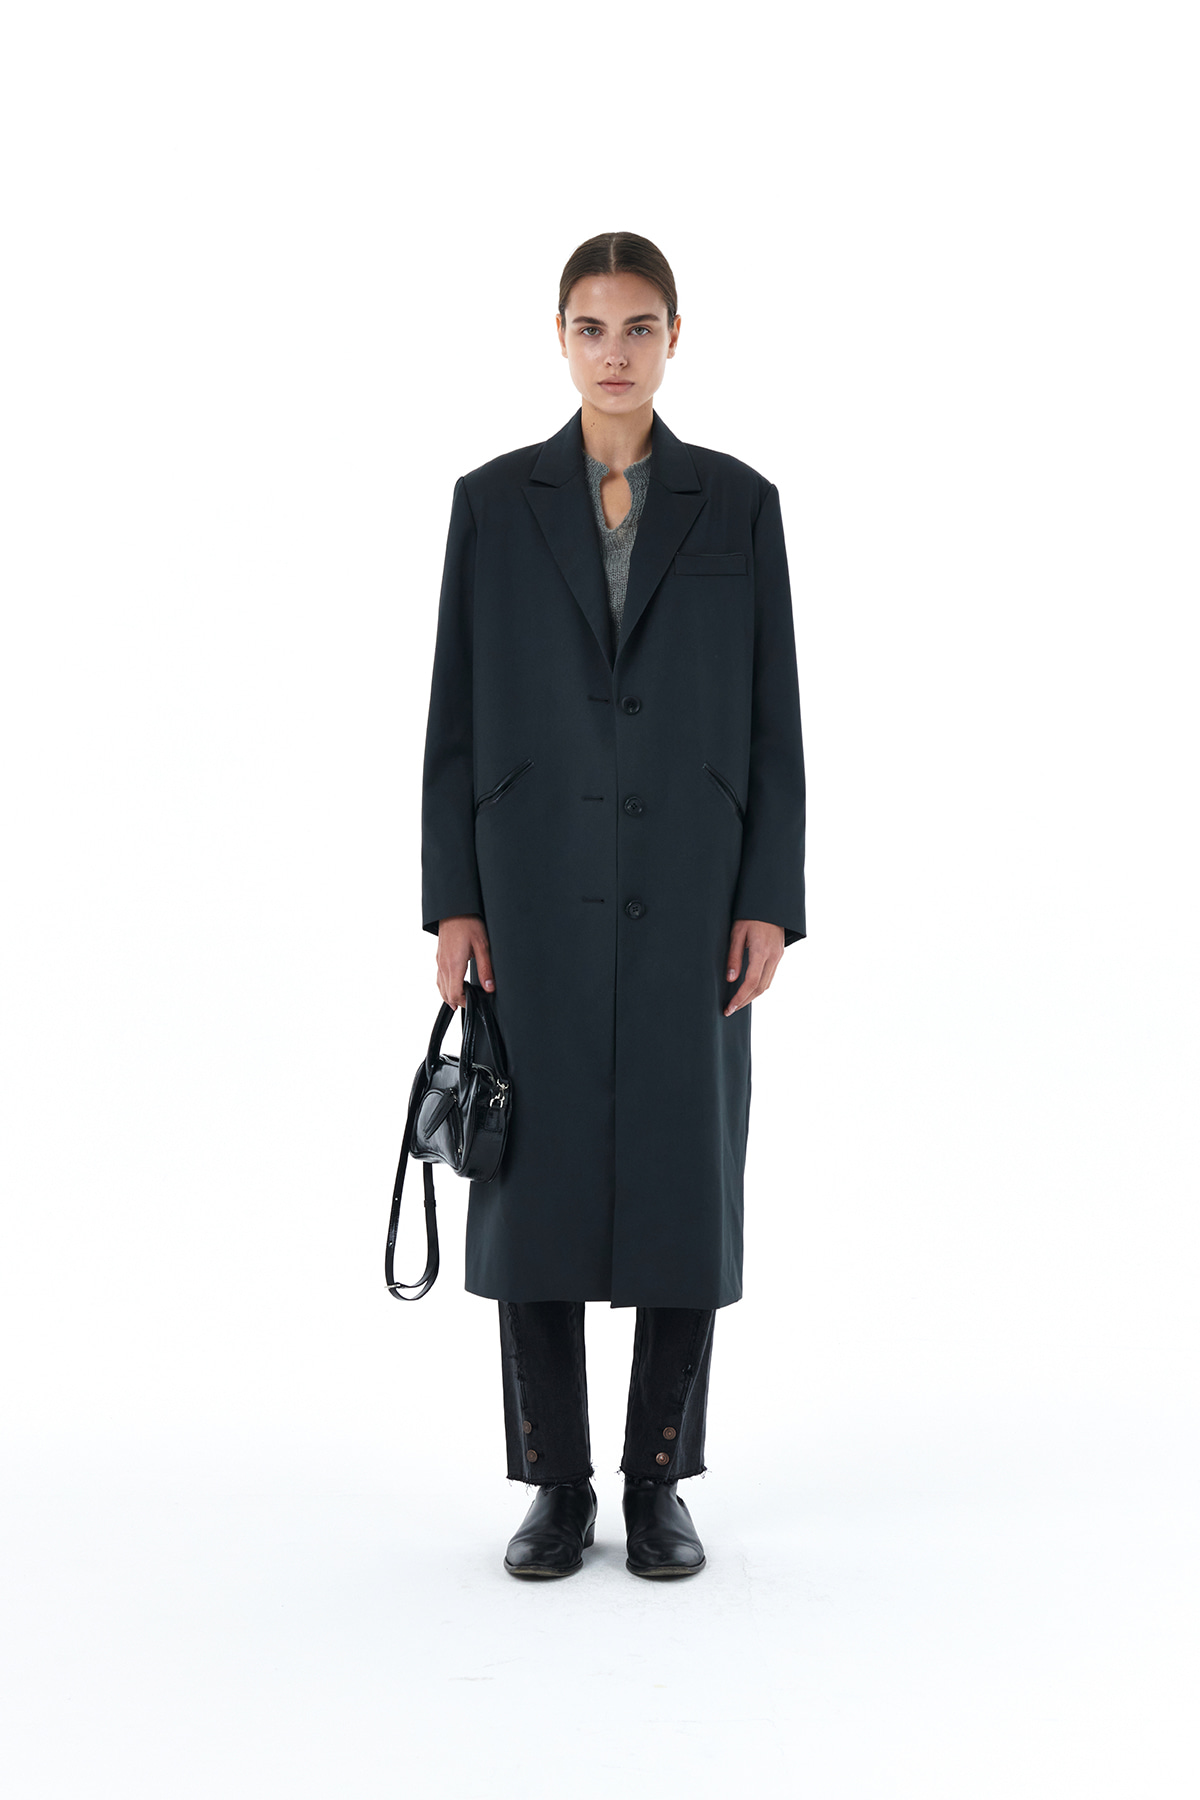 TAILORED SINGLE COAT JACKET IN CHARCOAL